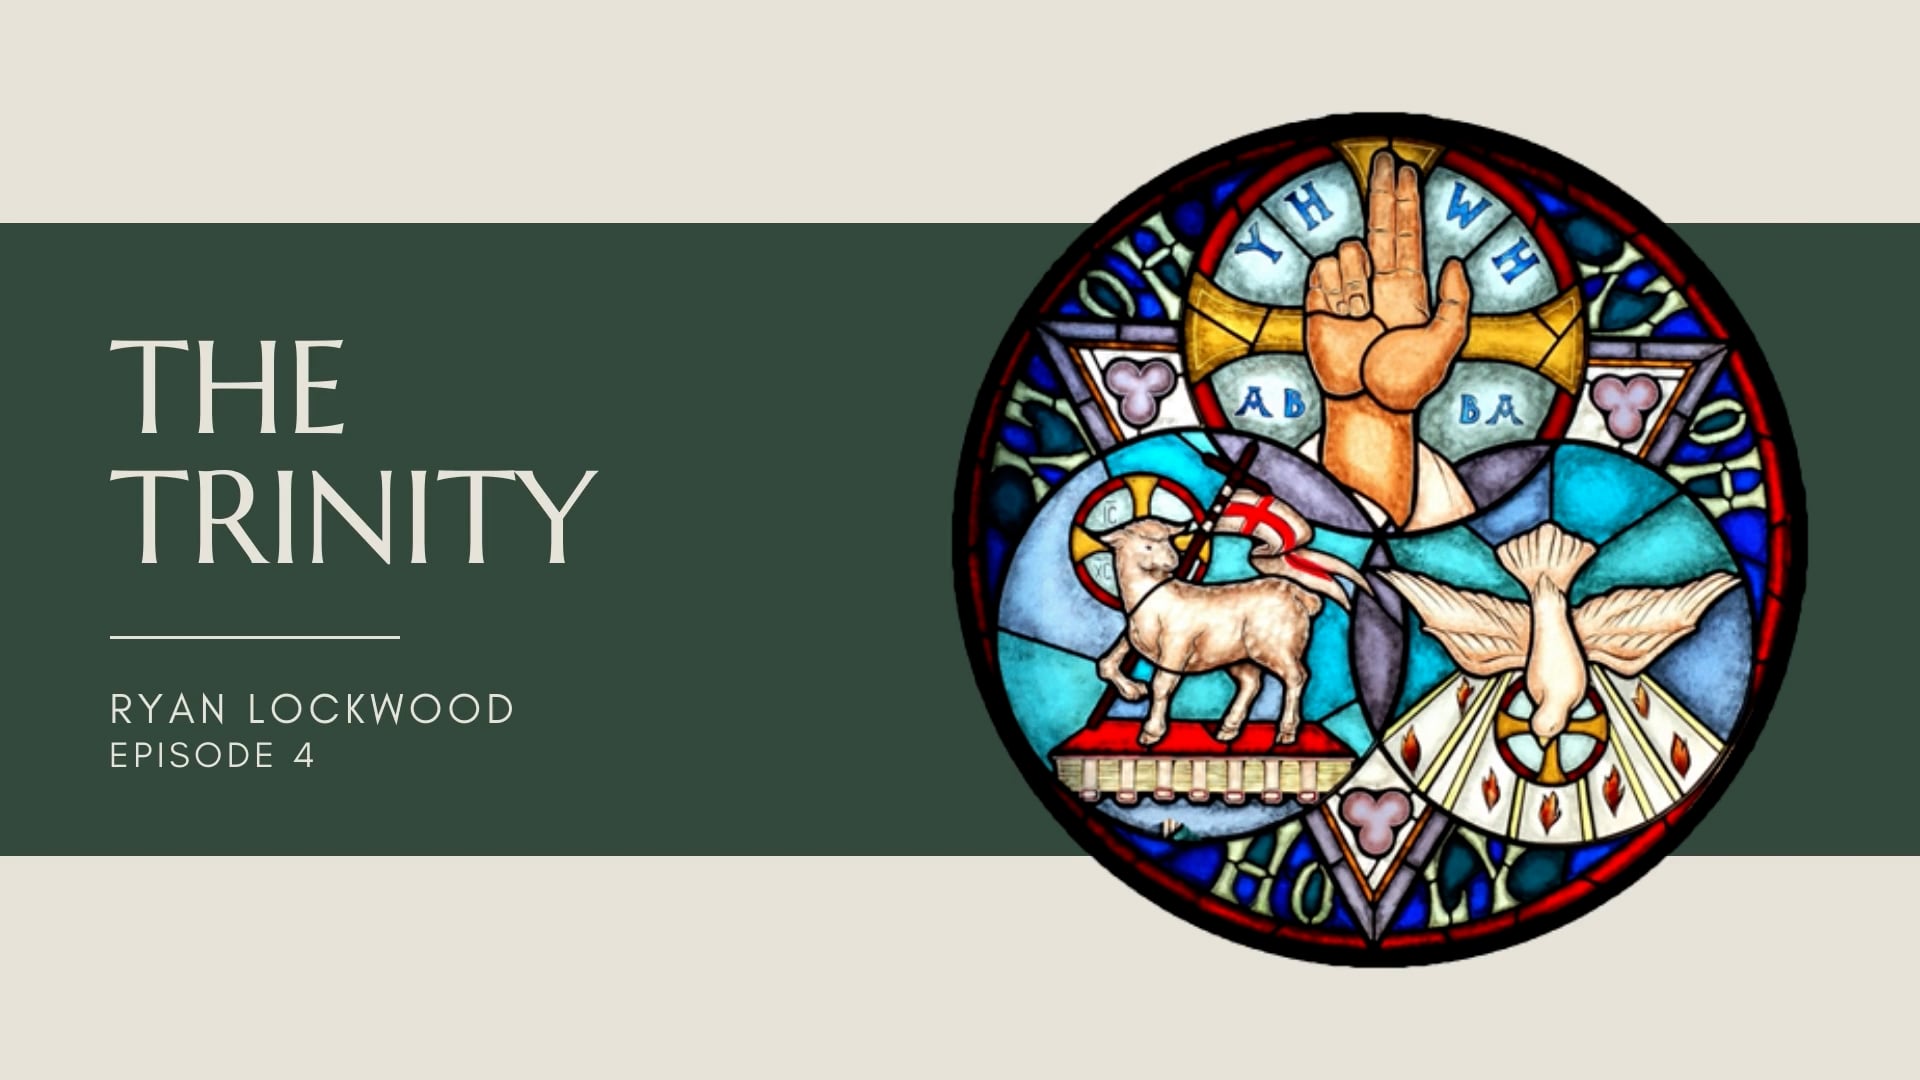 5 Minute Catechism - The Trinity